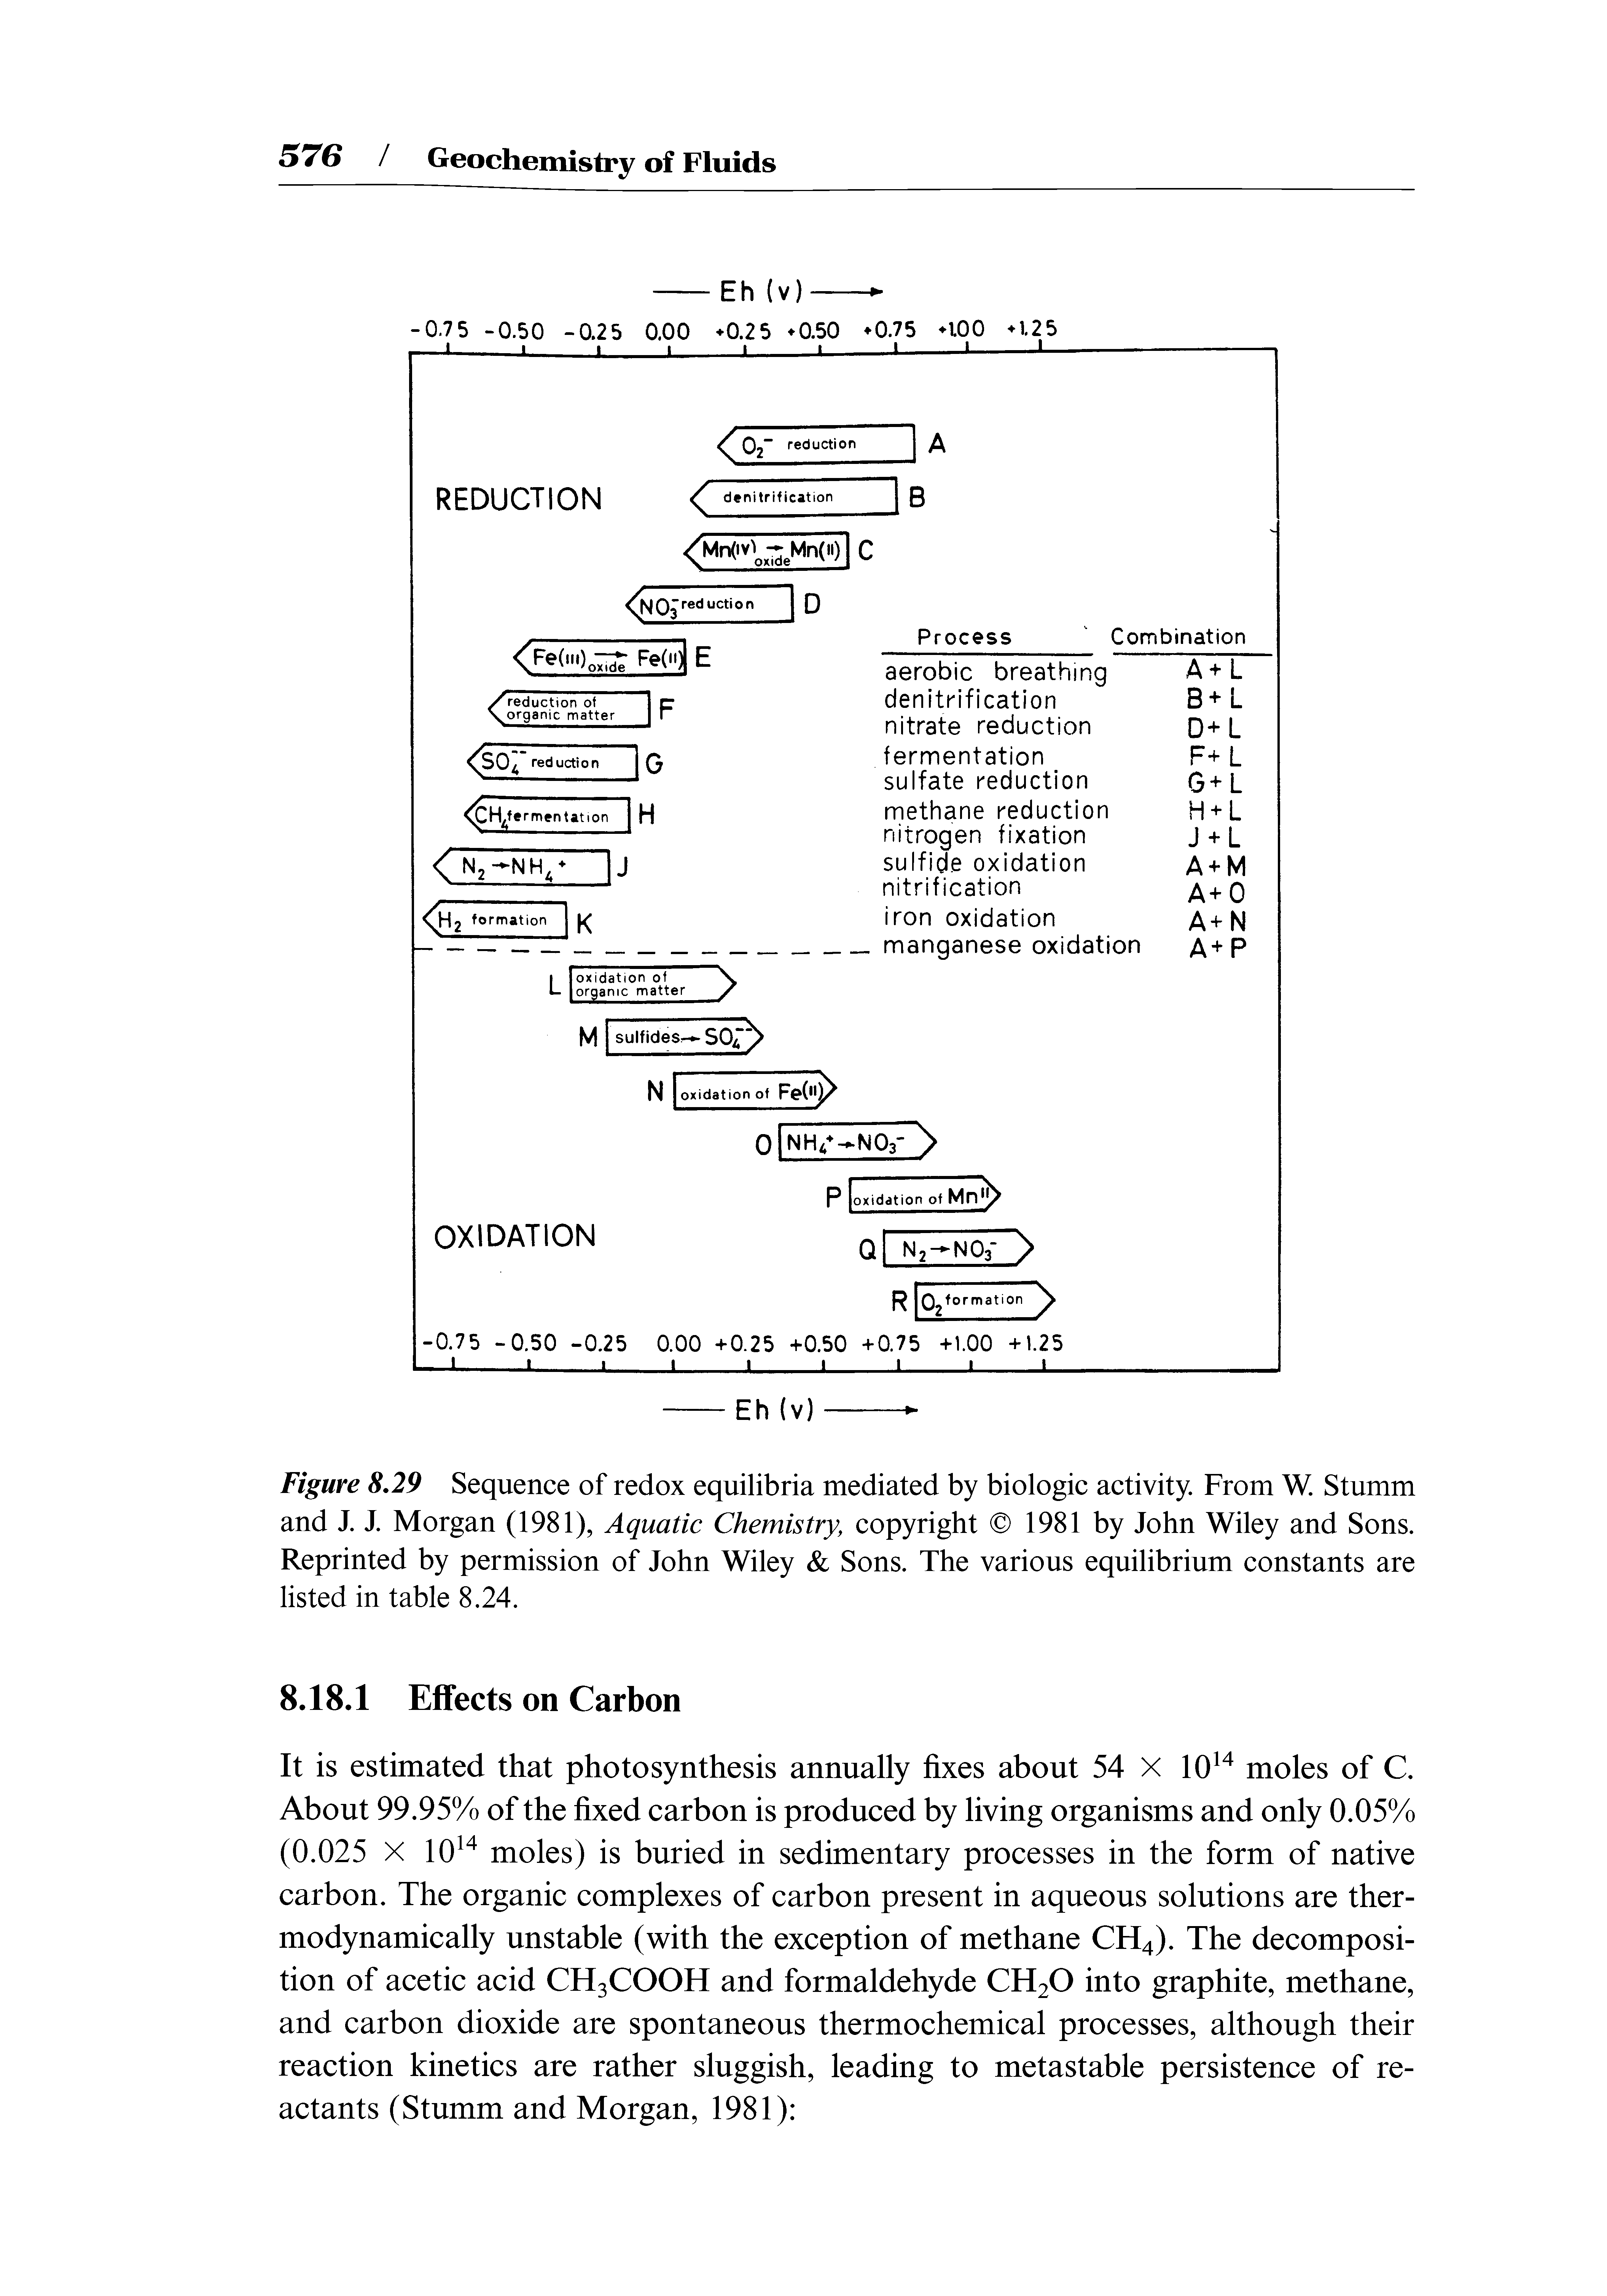 Figure 8.29 Sequence of redox equilibria mediated by biologic activity. From W. Stumm and J. J. Morgan (1981), Aquatic Chemistry, copyright 1981 by John Wiley and Sons. Reprinted by permission of John Wiley Sons. The various equilibrium constants are listed in table 8.24.